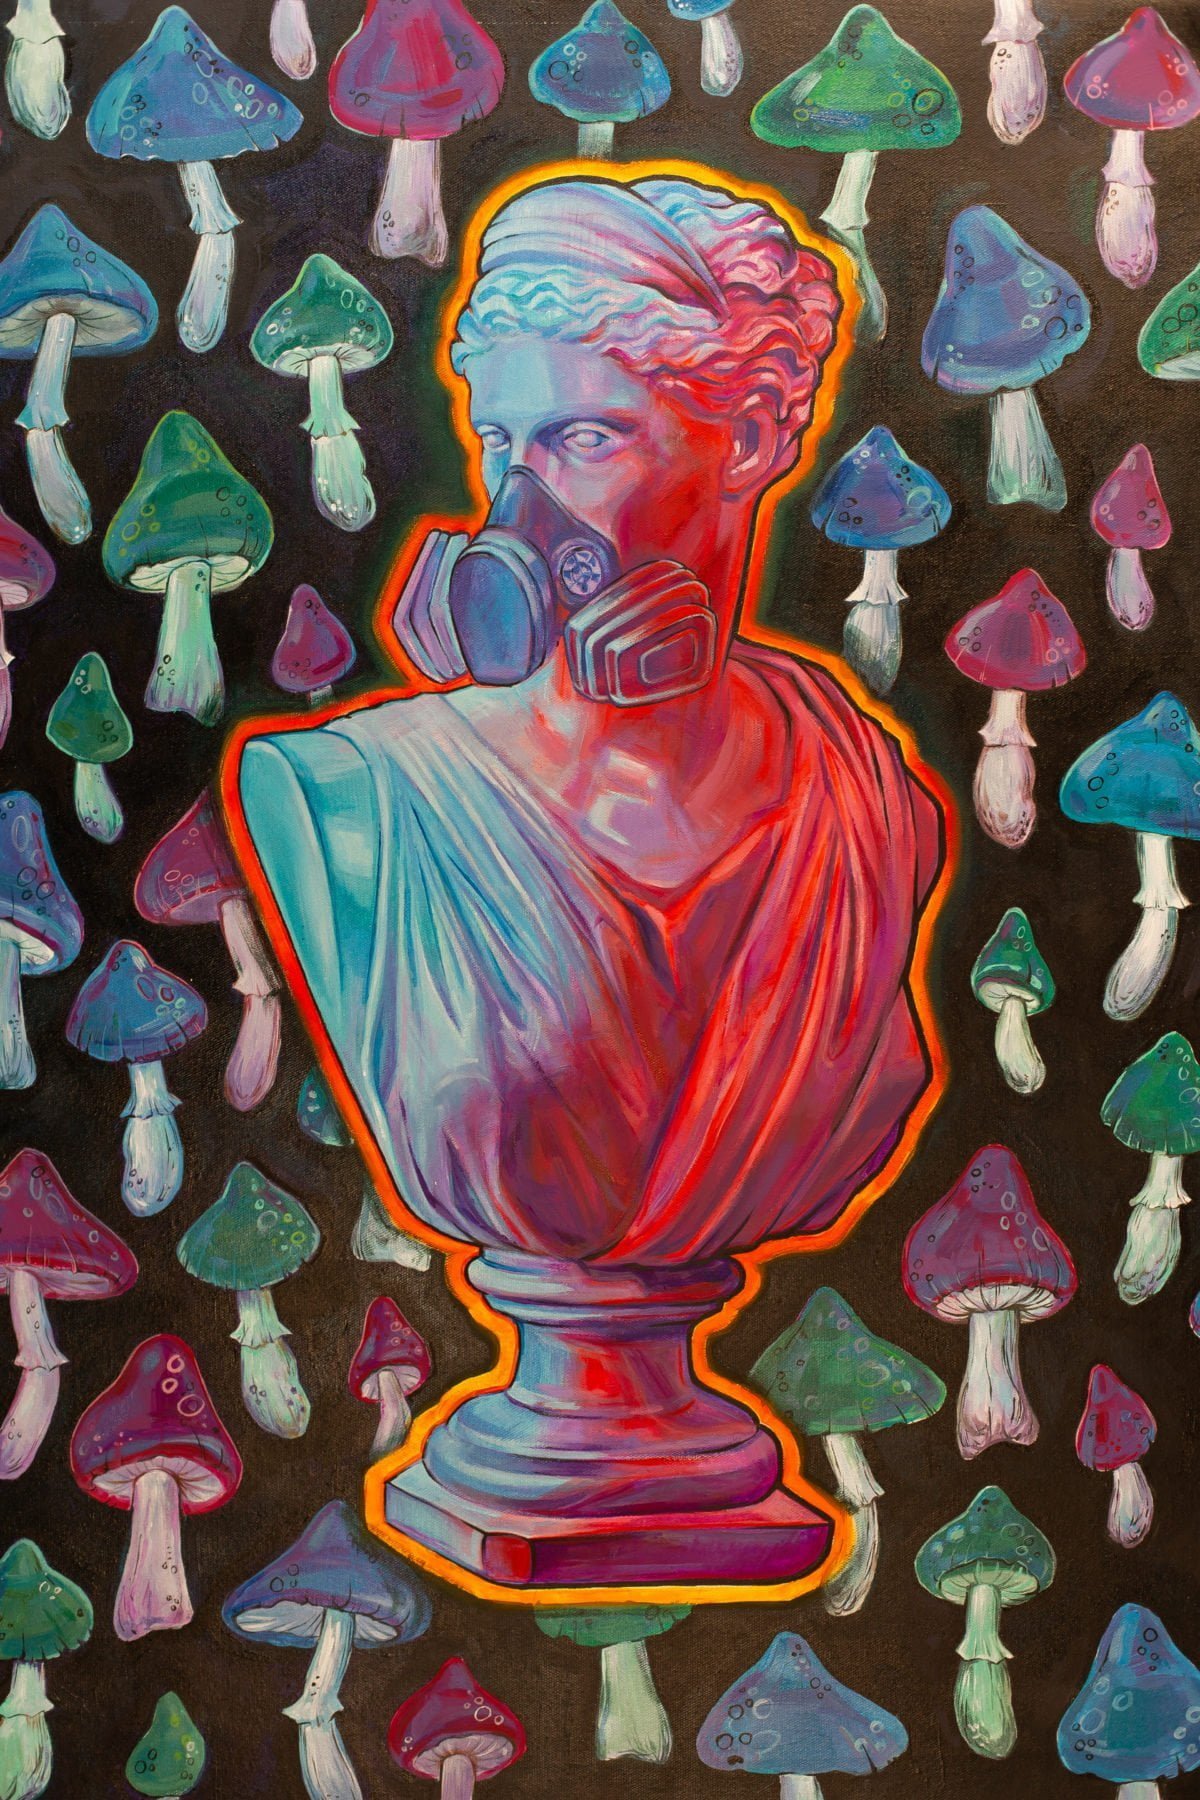 Original painting for sell from contemporary artist PopqueeN - Acid Aphrodite #2. For sell